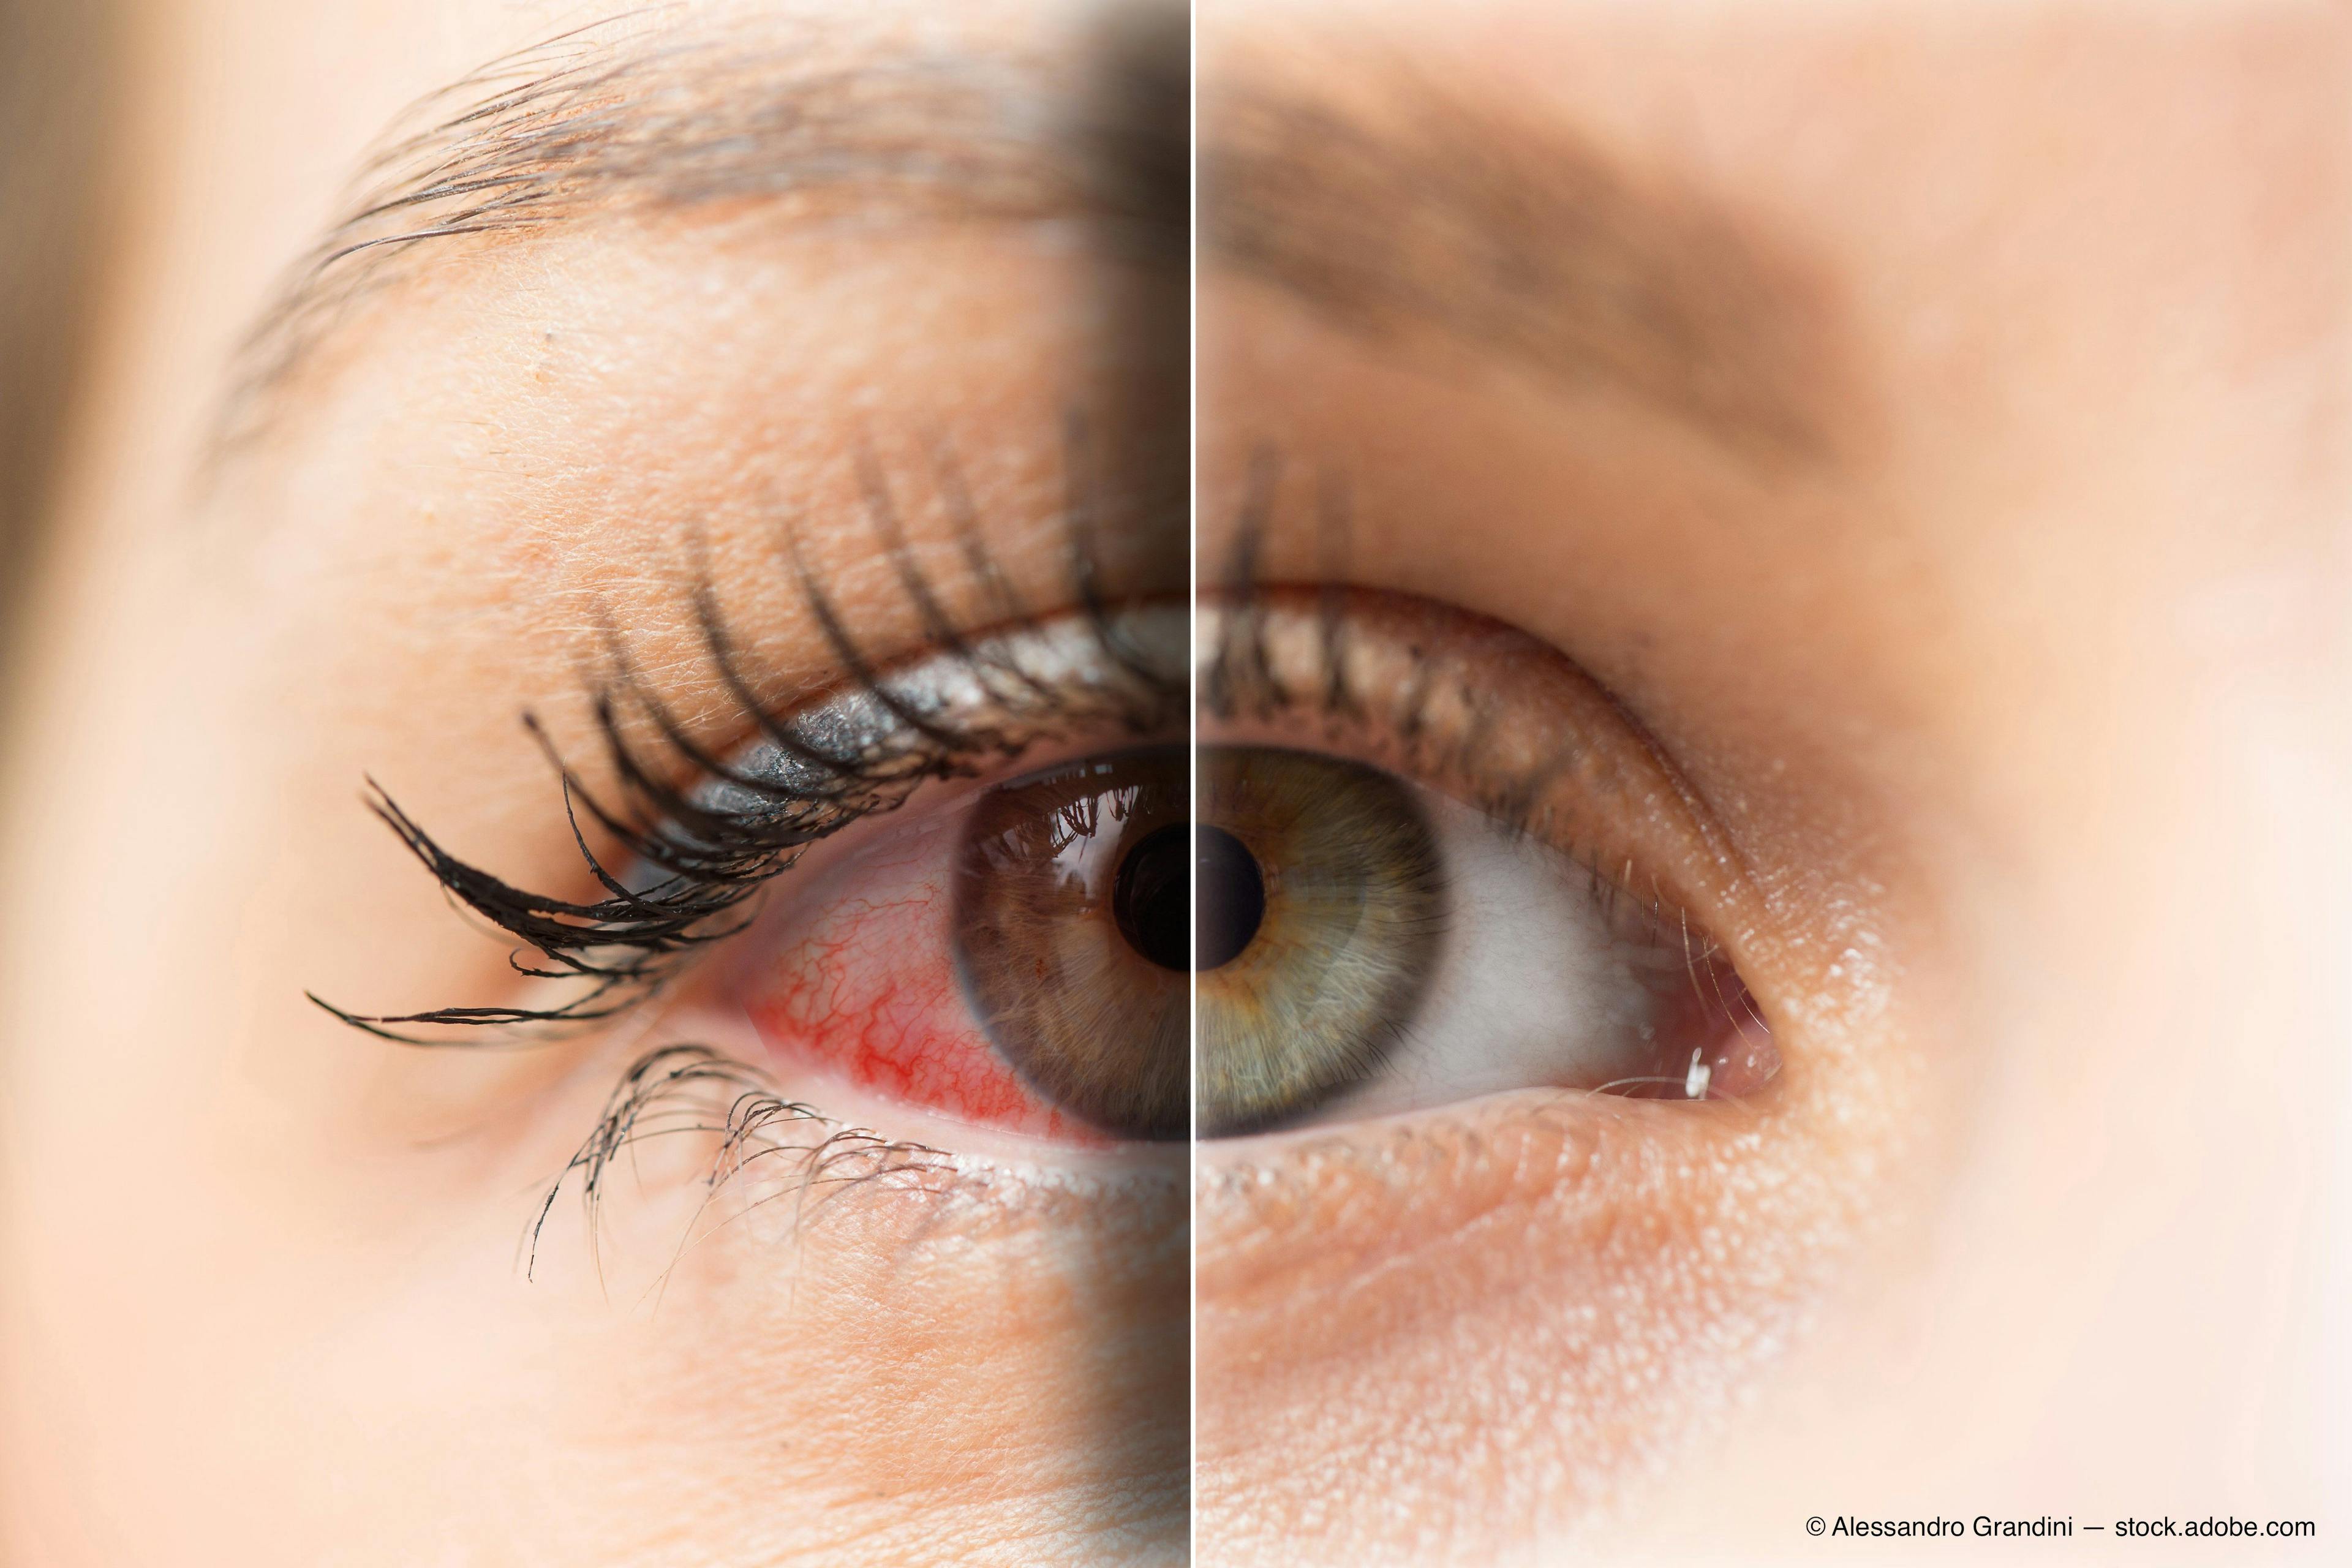 Blog: Don't leave dry eye disease patients high and dry